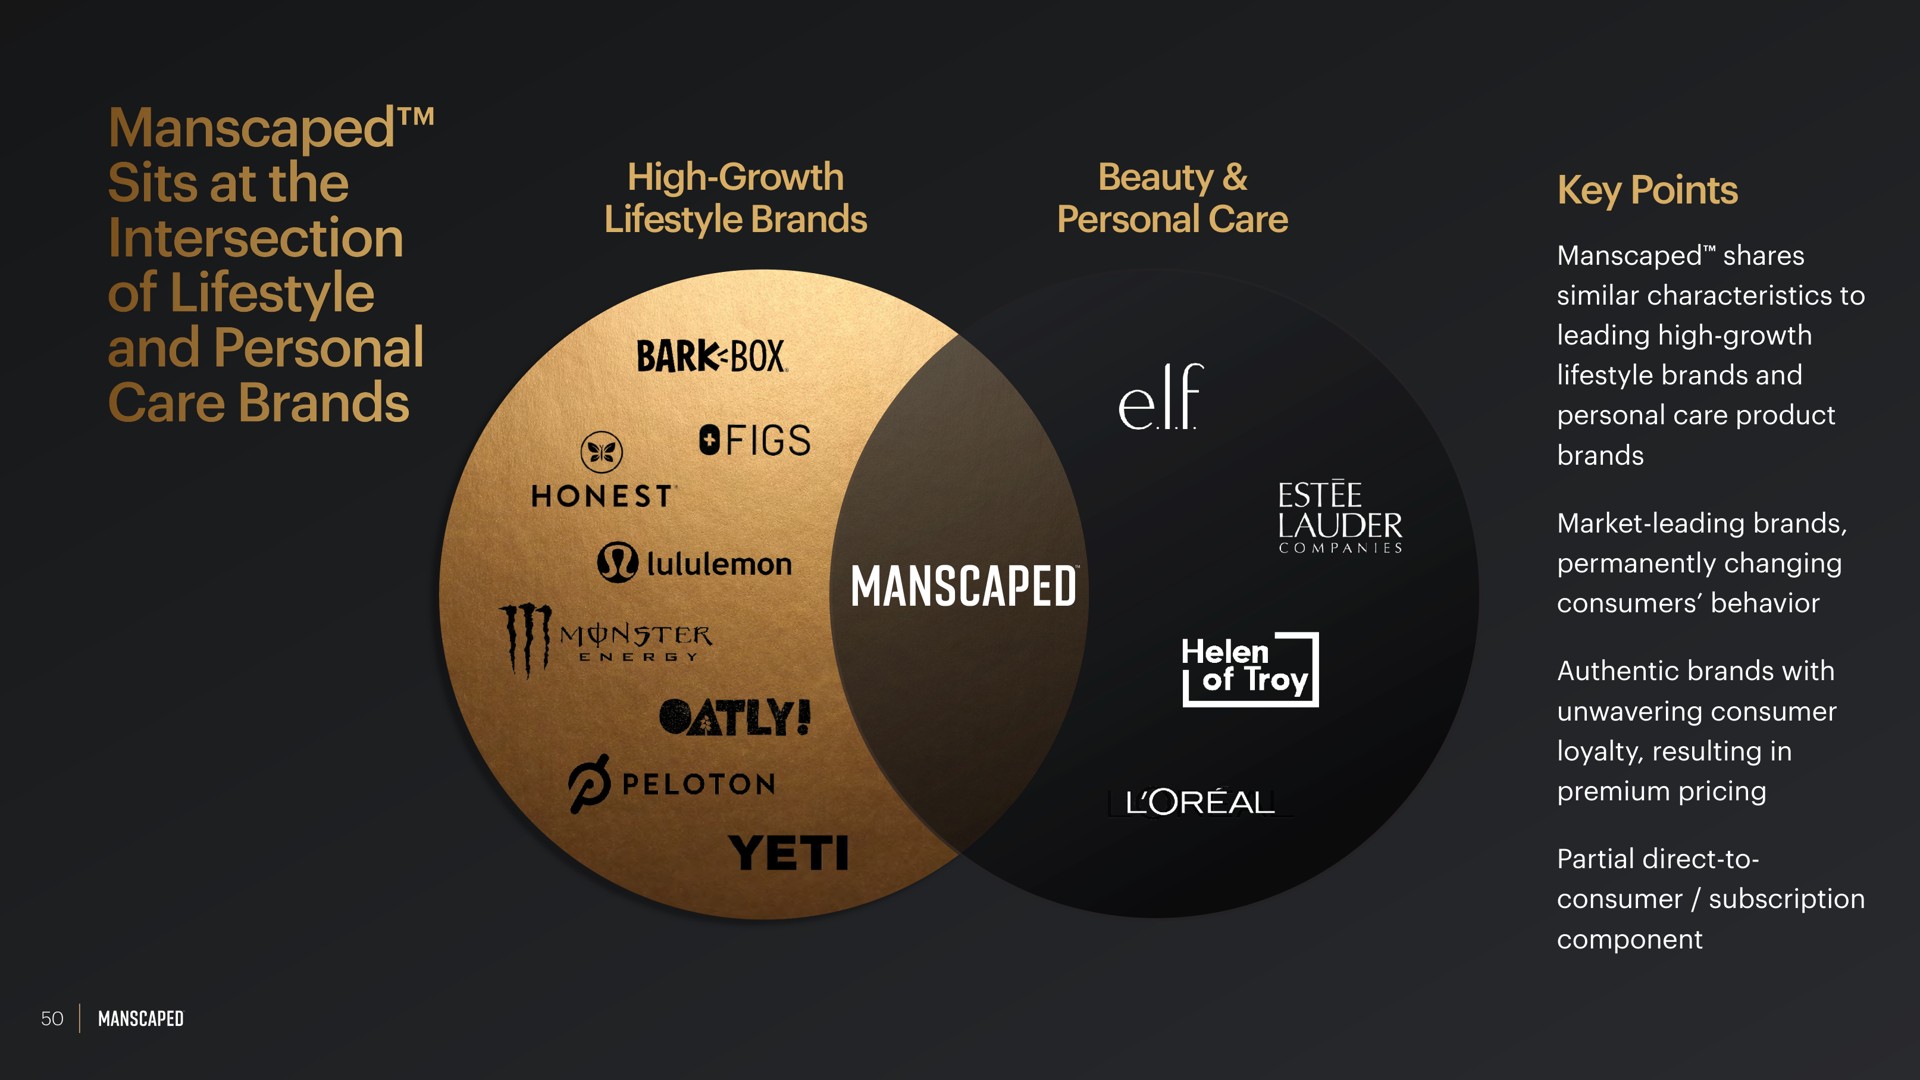 sits at the intersection of and personal care brands high growth brands beauty personal care key points its are bark box honest has | Manscaped